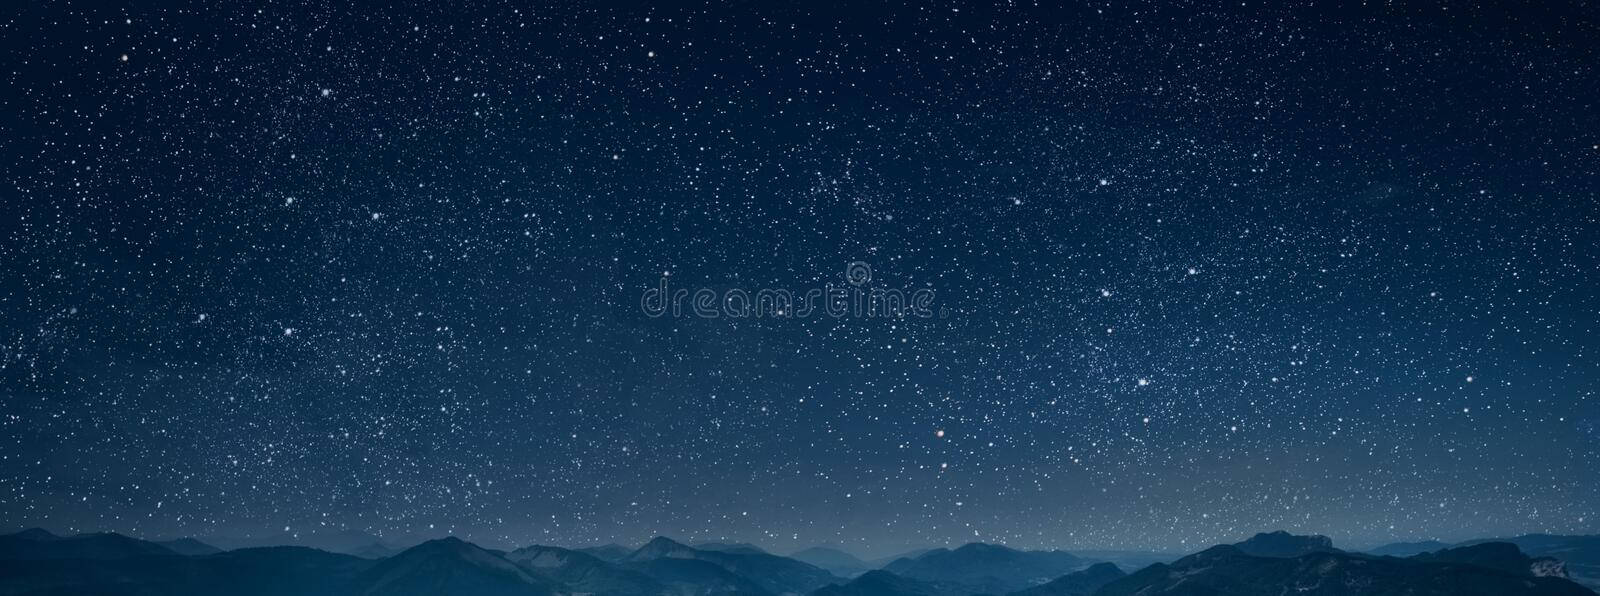 A Nighttime View of the Majestic Mountains Wallpaper